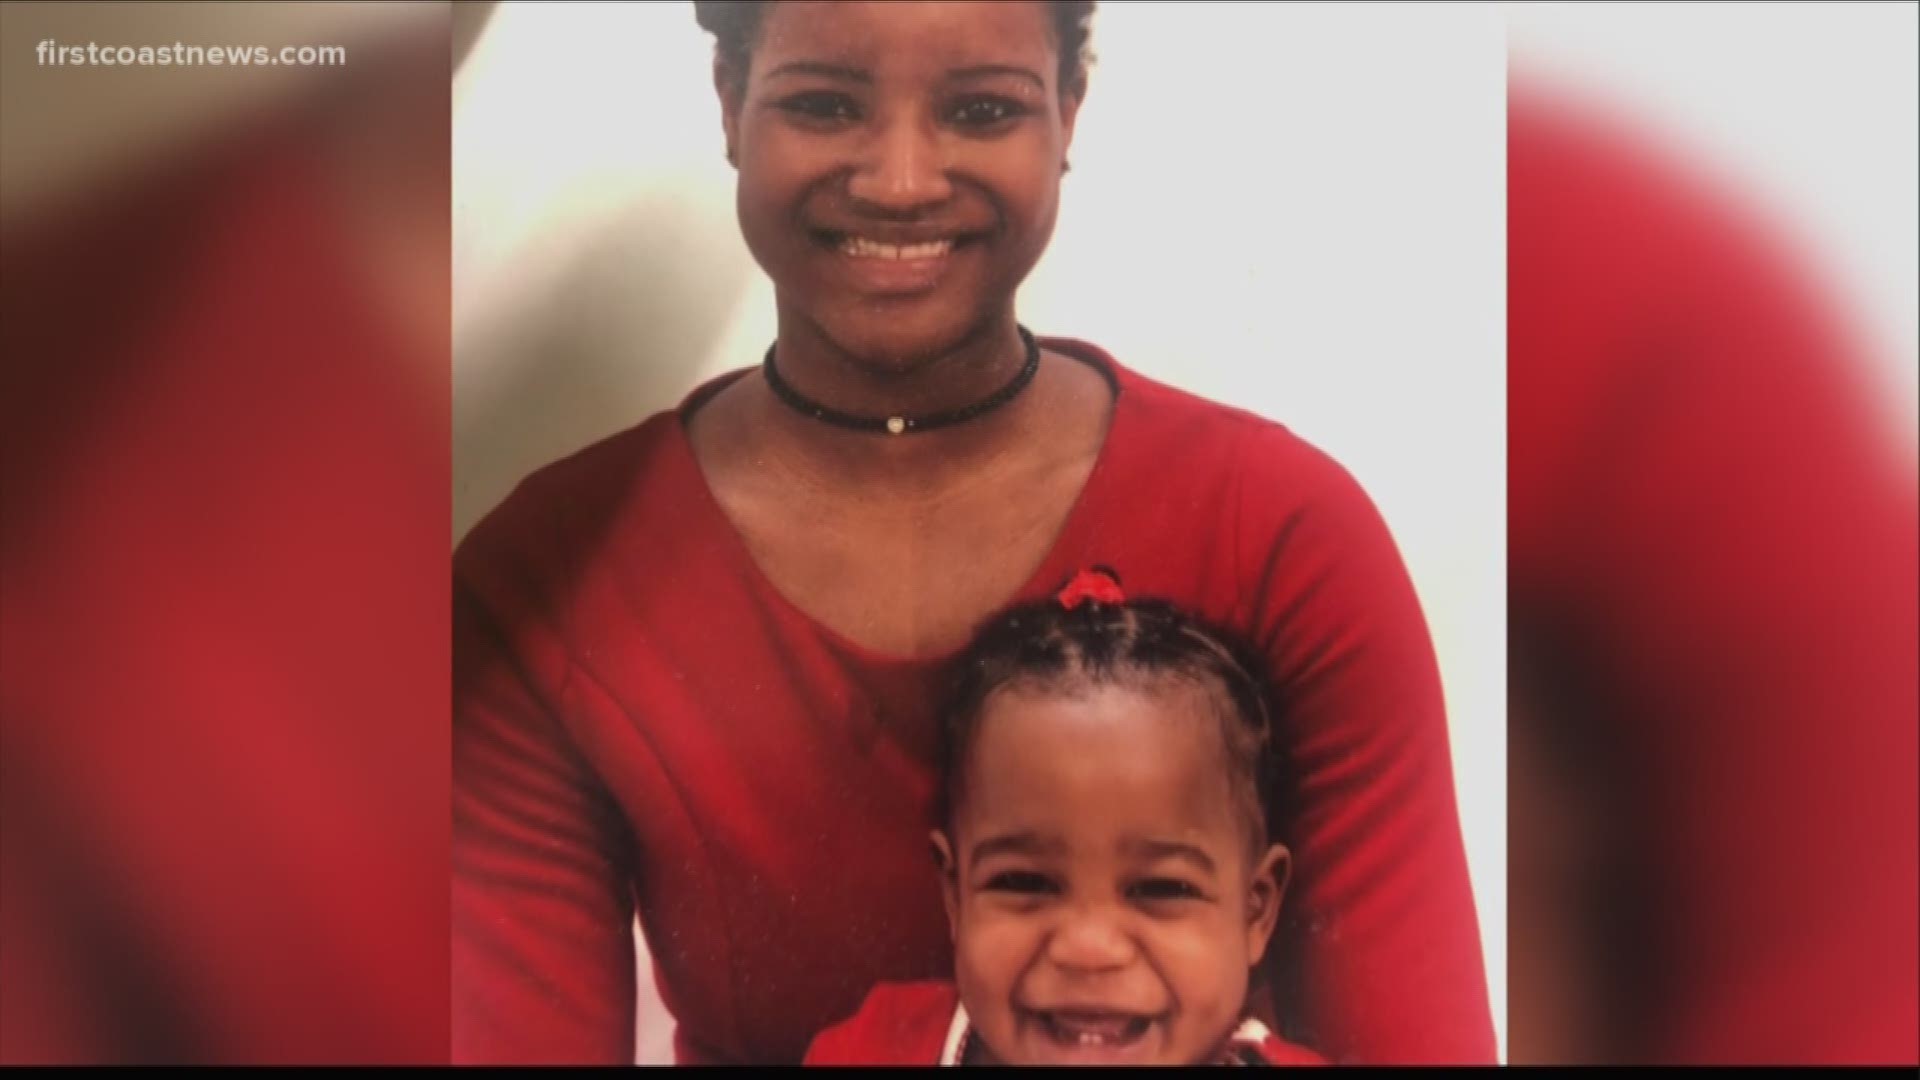 Two law enforcement sources say Brianna Williams, the mother of missing 5-year-old Taylor Williams, is in life-threatening condition after she attempted suicide.